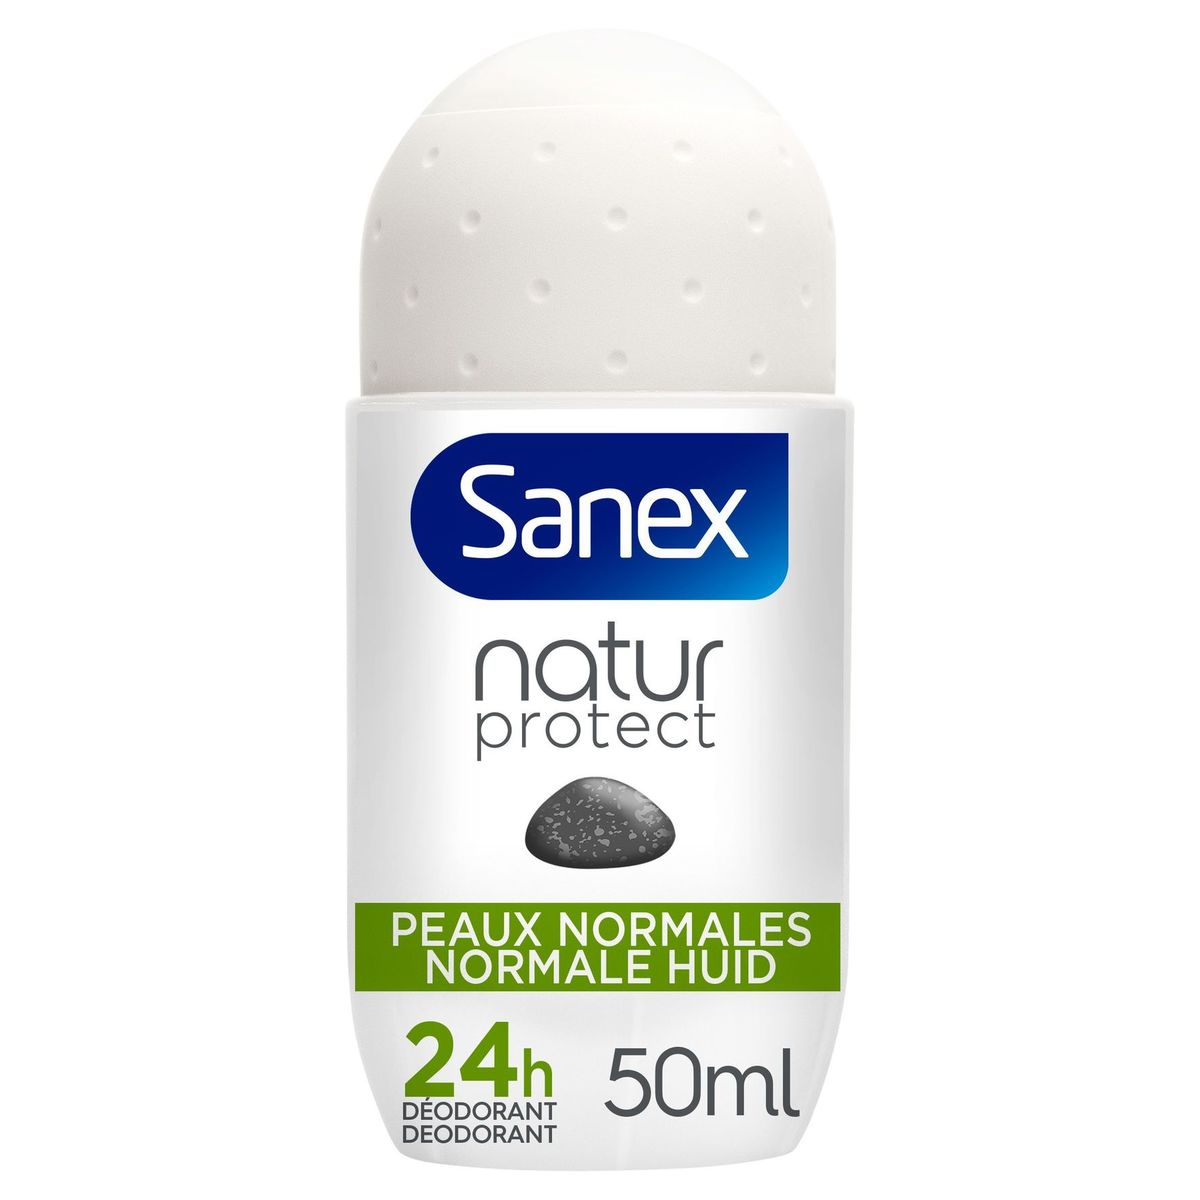 Sanex deodorant 24h Naturprotect normale huid roll-on 50ml